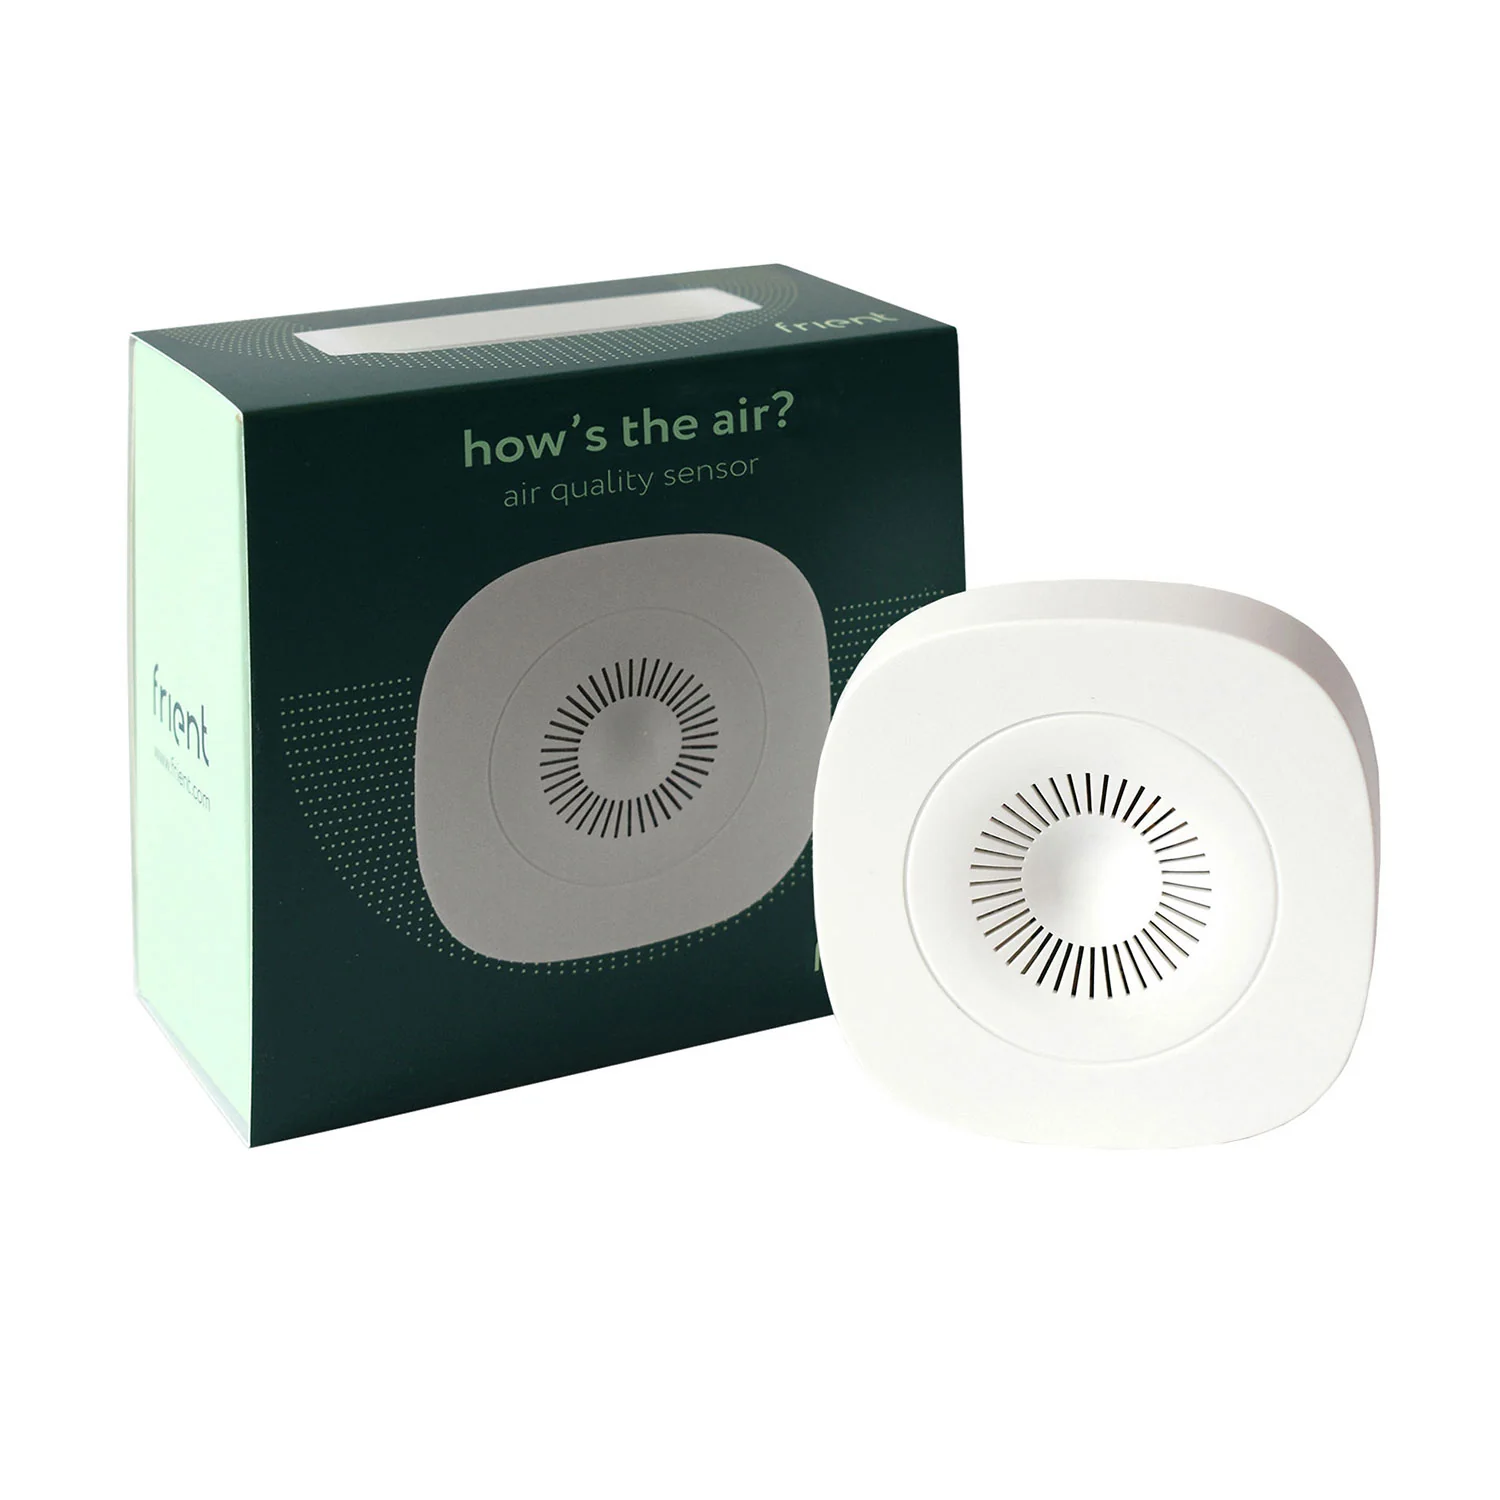 What does the Zigbee air quality sensor monitor before I buy it?